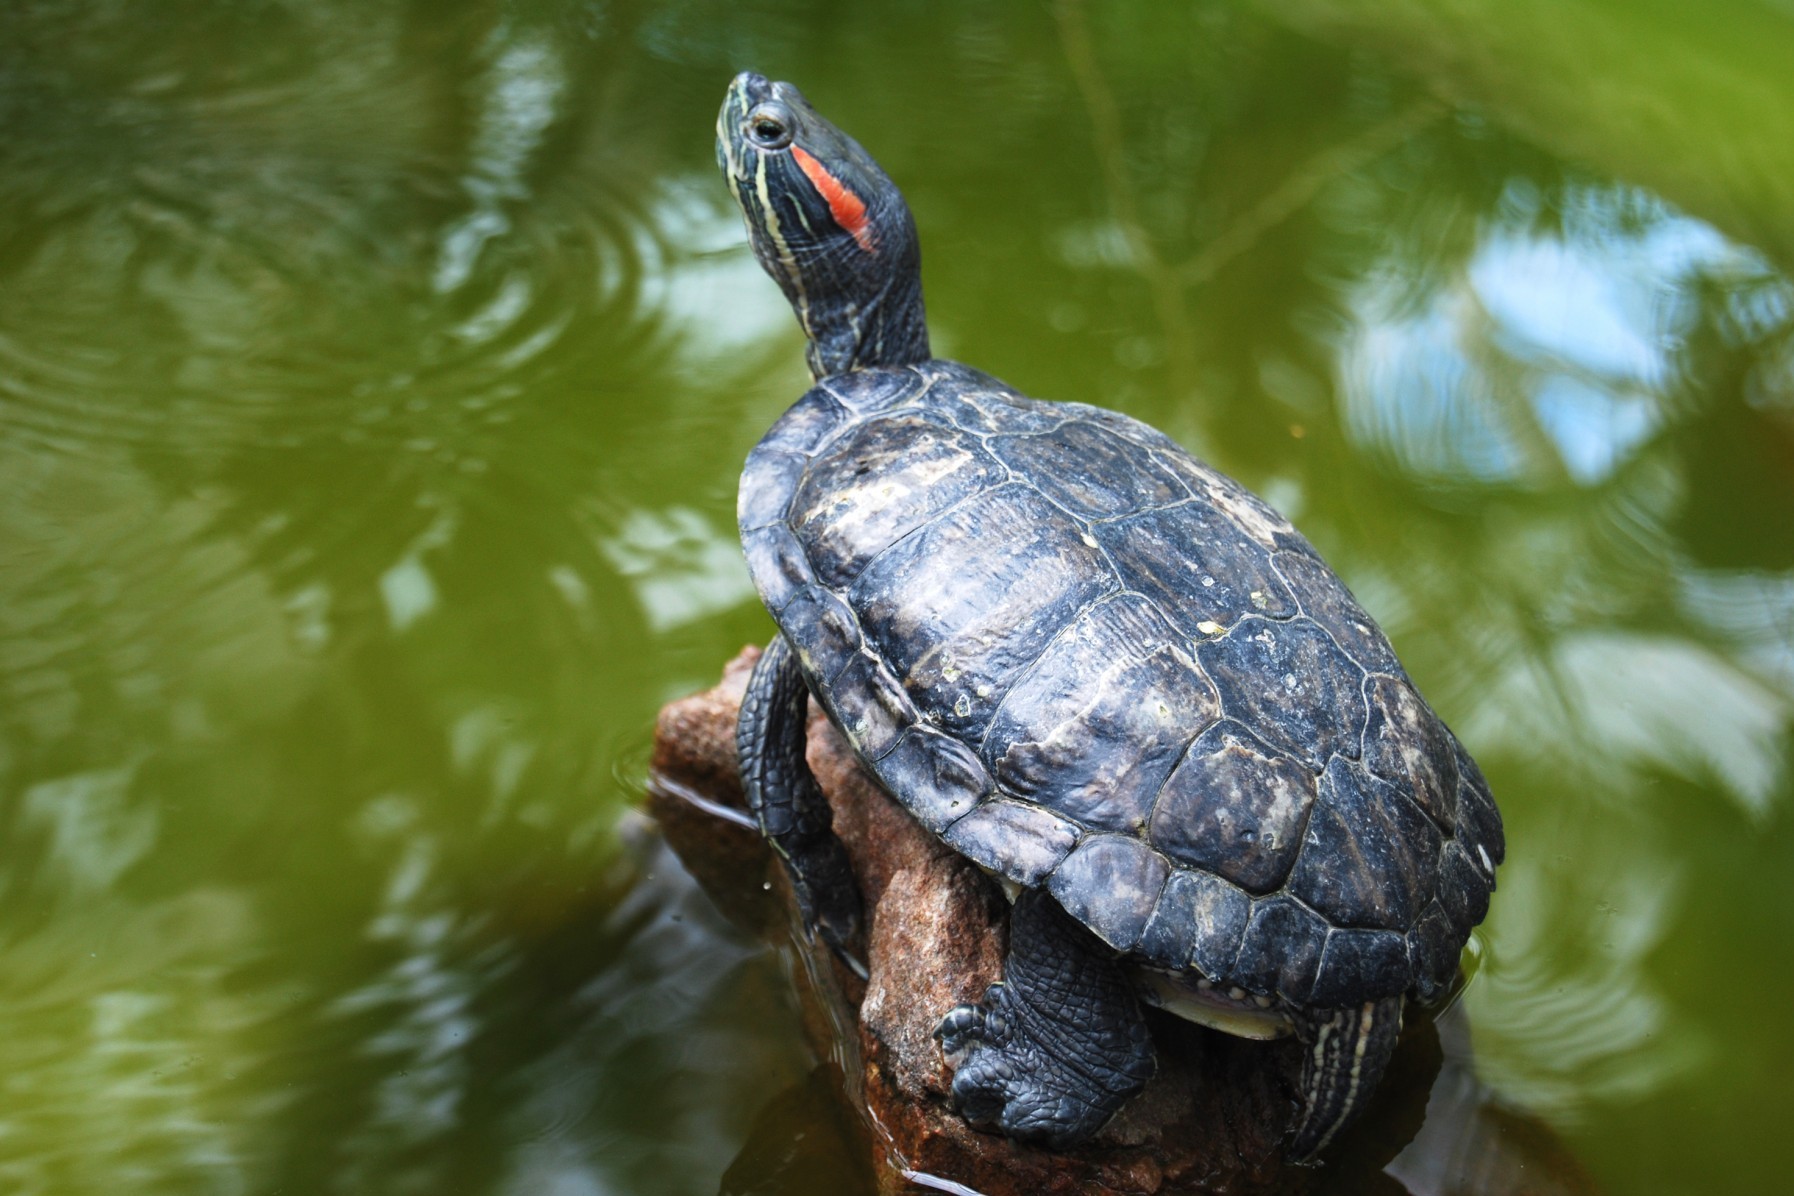 A red eared slider turtle. Photo by iStock.